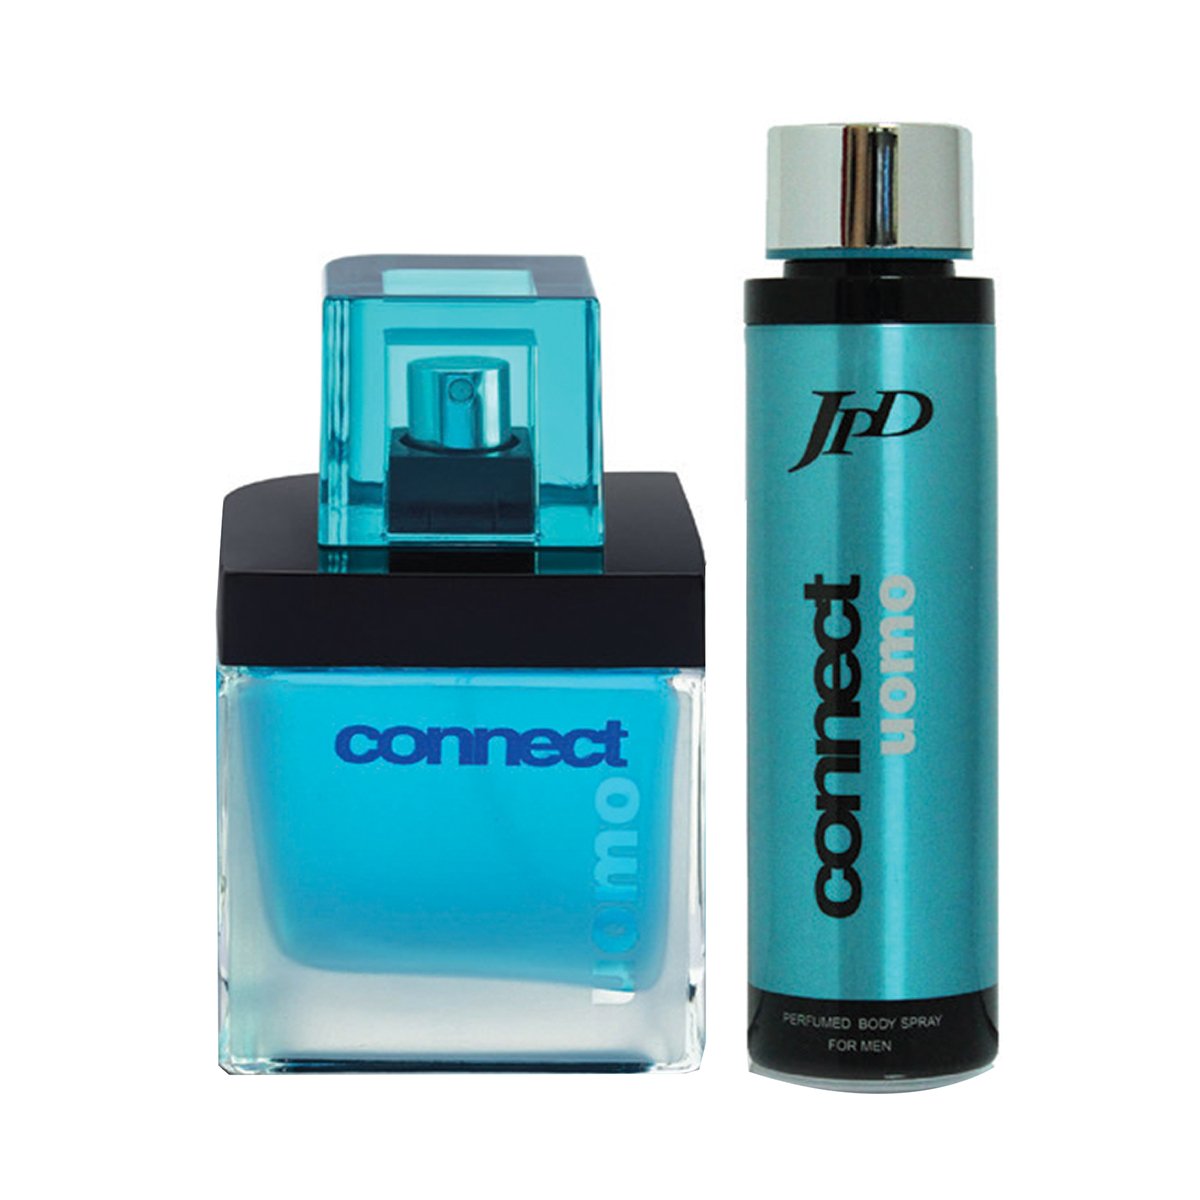 JPD Connect Uomo for Men 100 ml + Deo Spray 150 ml